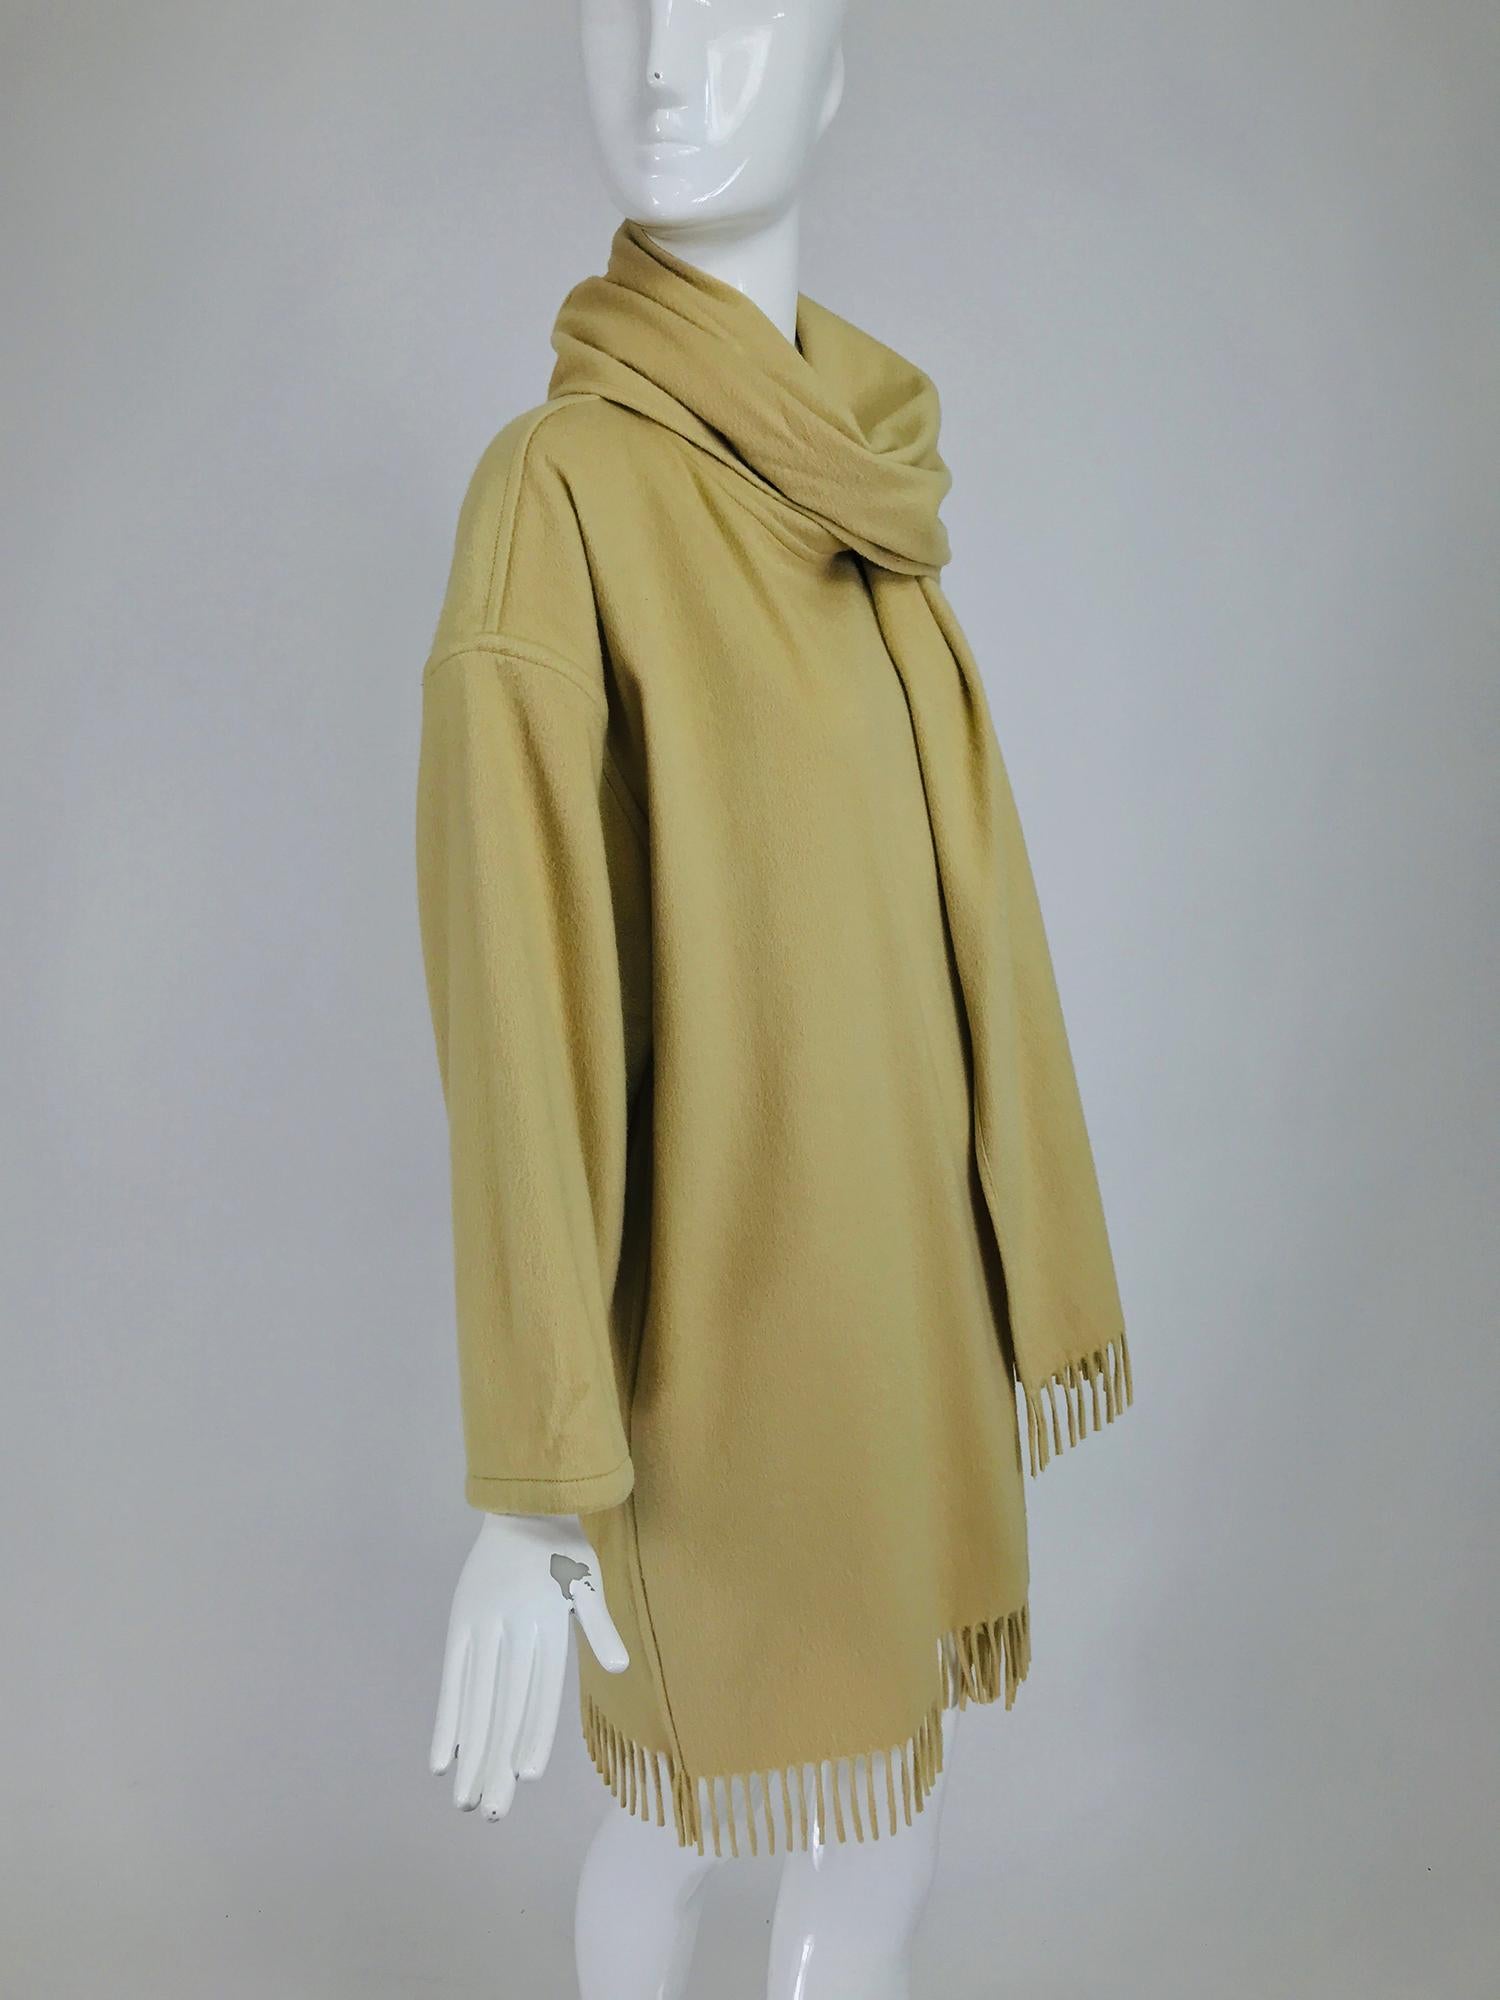 Salvatore Ferragamo double face cashmere fringe coat in creamy taupe from the 1980s. Unlined open front coat with flat felled seams. The neckline has an attached wide shawl collar each end has self fringe. The dropped sleeves are cut wide and